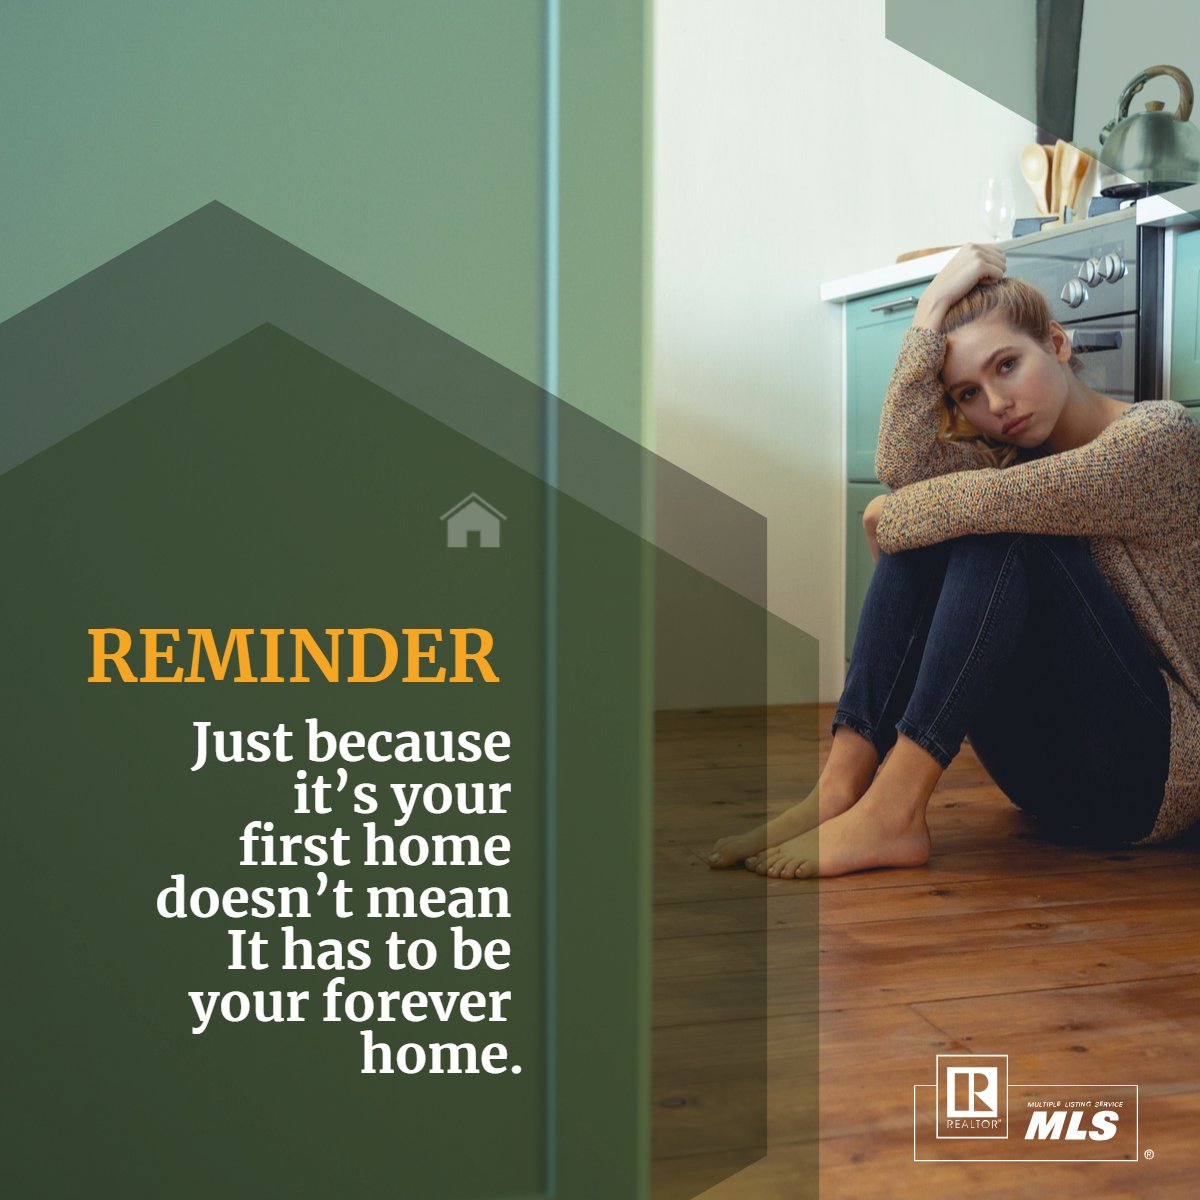 💭 Just like life, homes are always changing and evolving.

Whether it's your first home or your future dream house, cherish the memories you make along the way.

#LifeJourney
 #lannonstonerealty